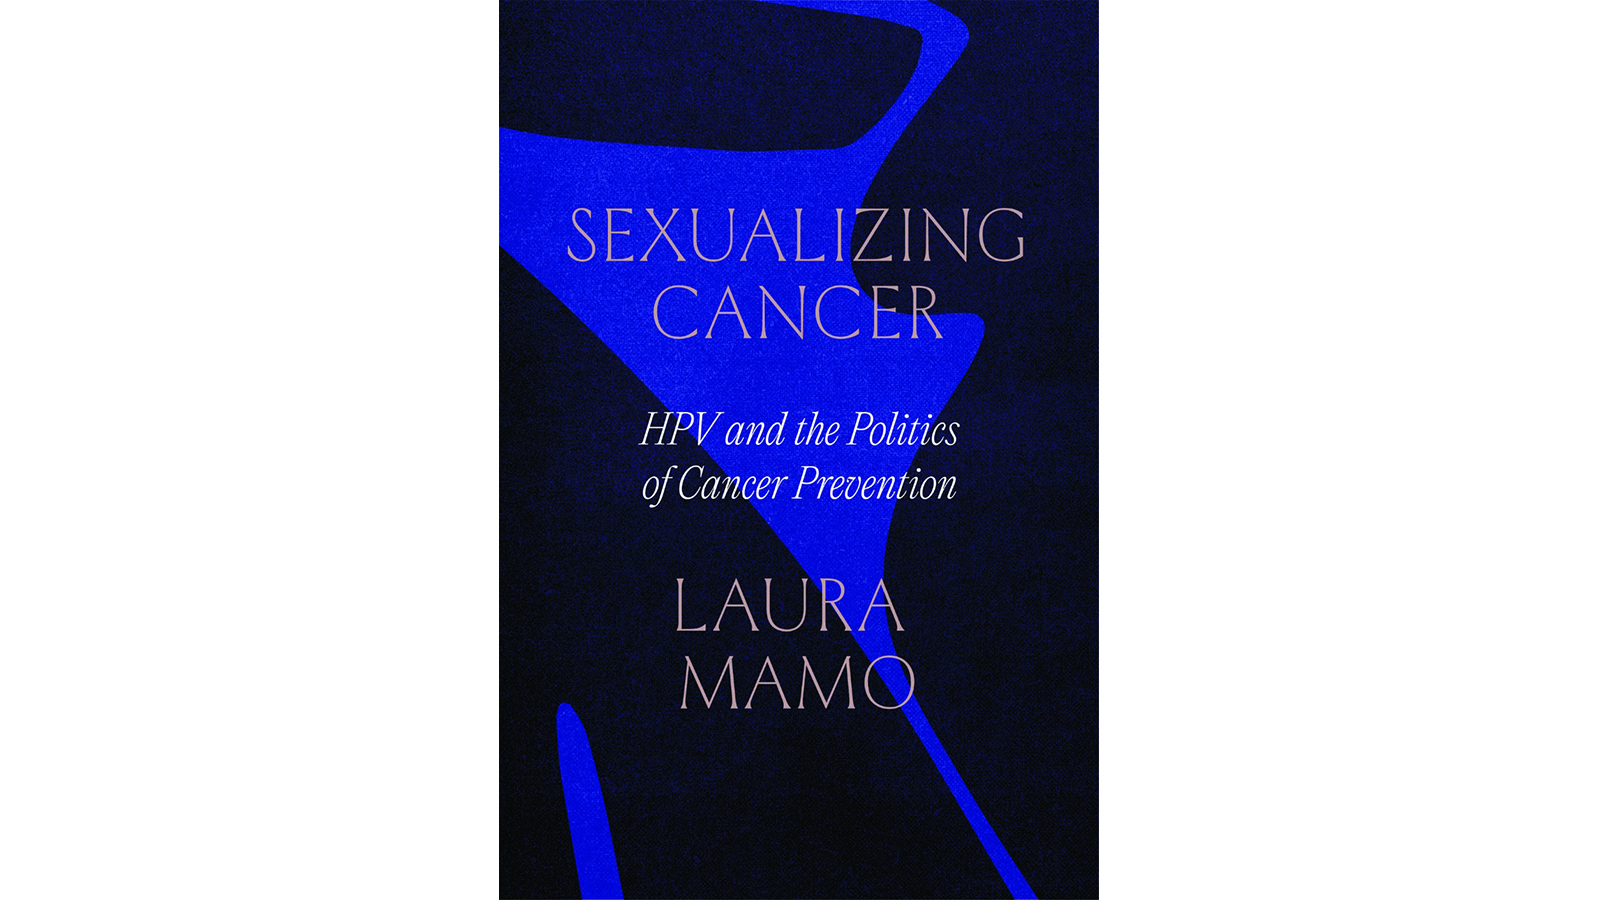 The cover of Laura Mamo's book, Sexualizing Cancer: HPV and the Politics of Cancer Prevention. The cover is royal blue with abstract black shapes around the edges.